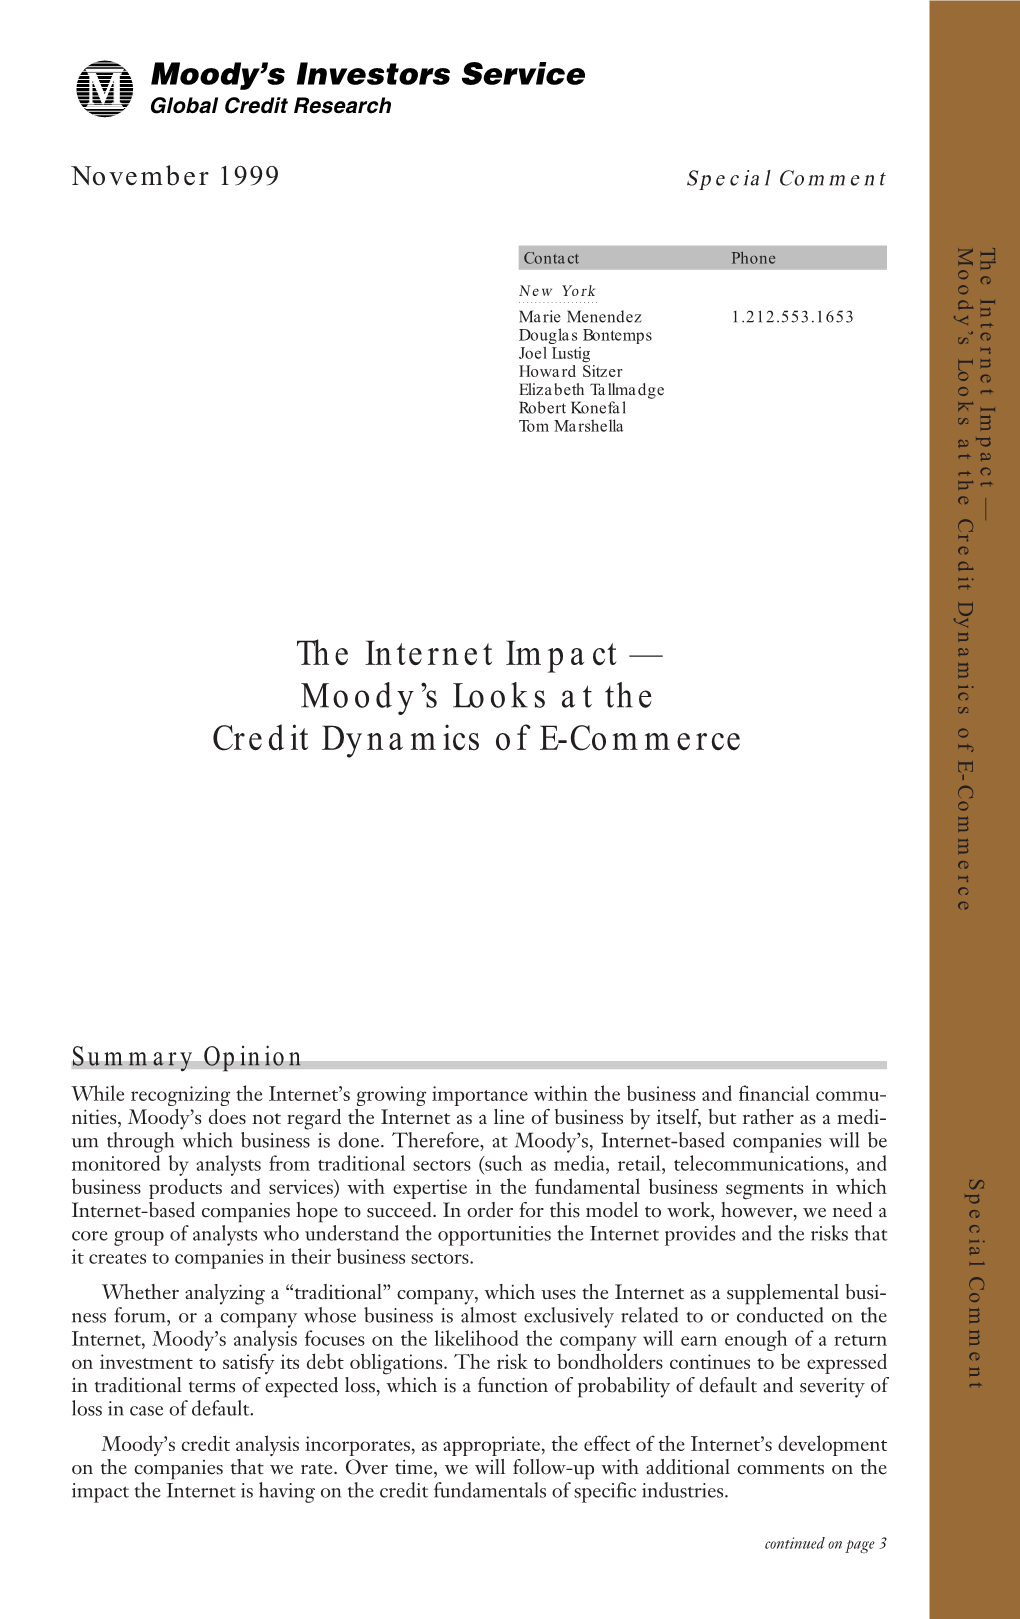 Moody's Looks at the Credit Dynamics of E-Commerce